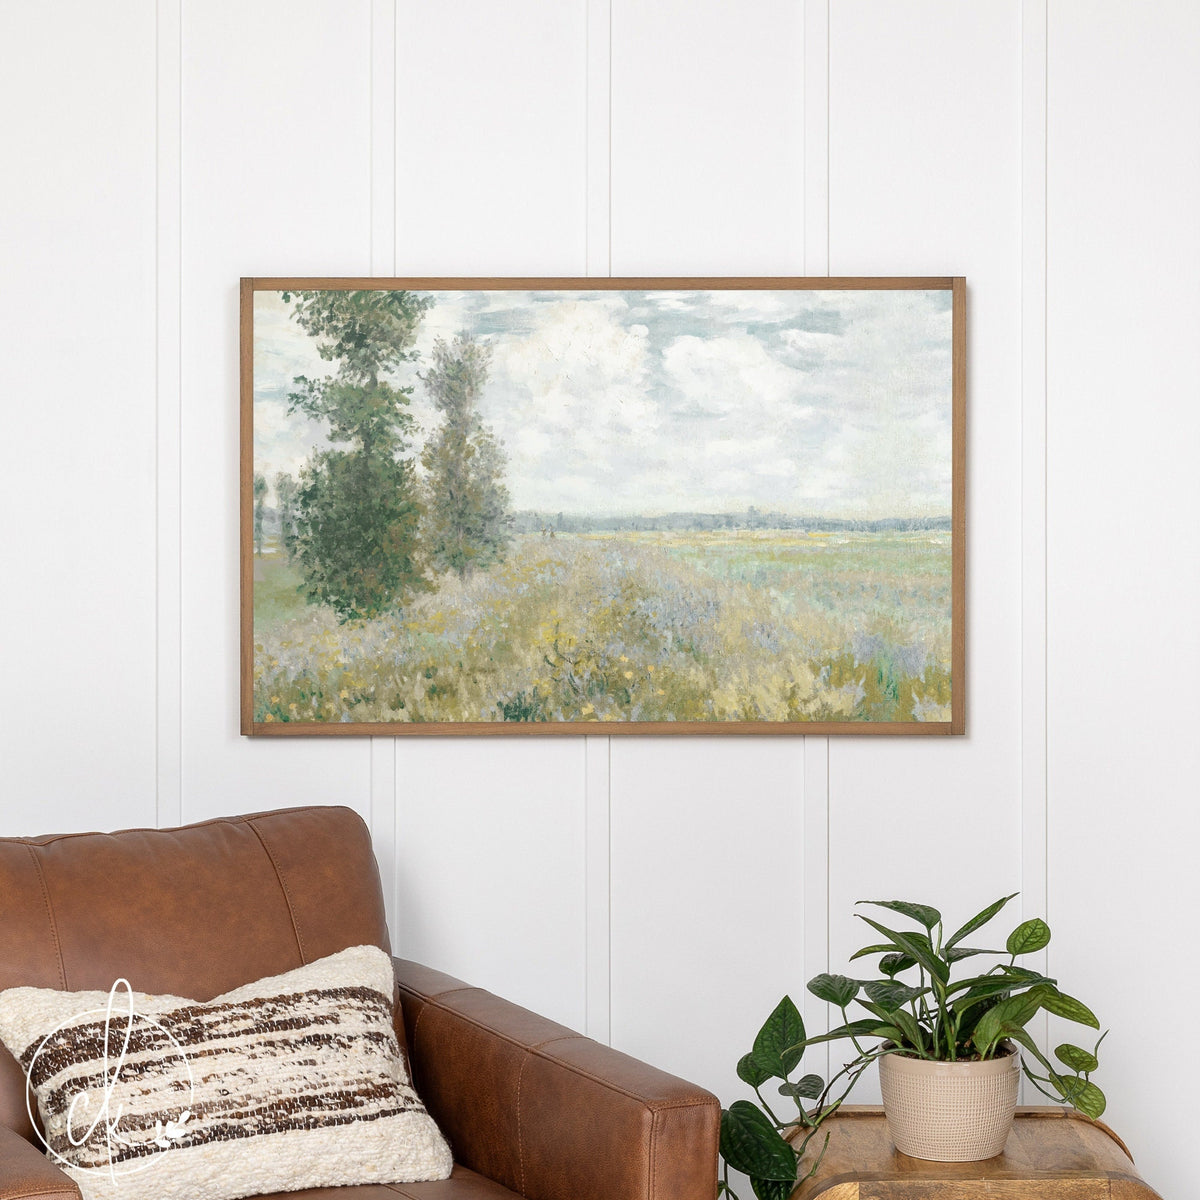 Framed Vintage Wall Art | Muted Landscape | Large Wall Art | Living Room Decor | Entryway Decor